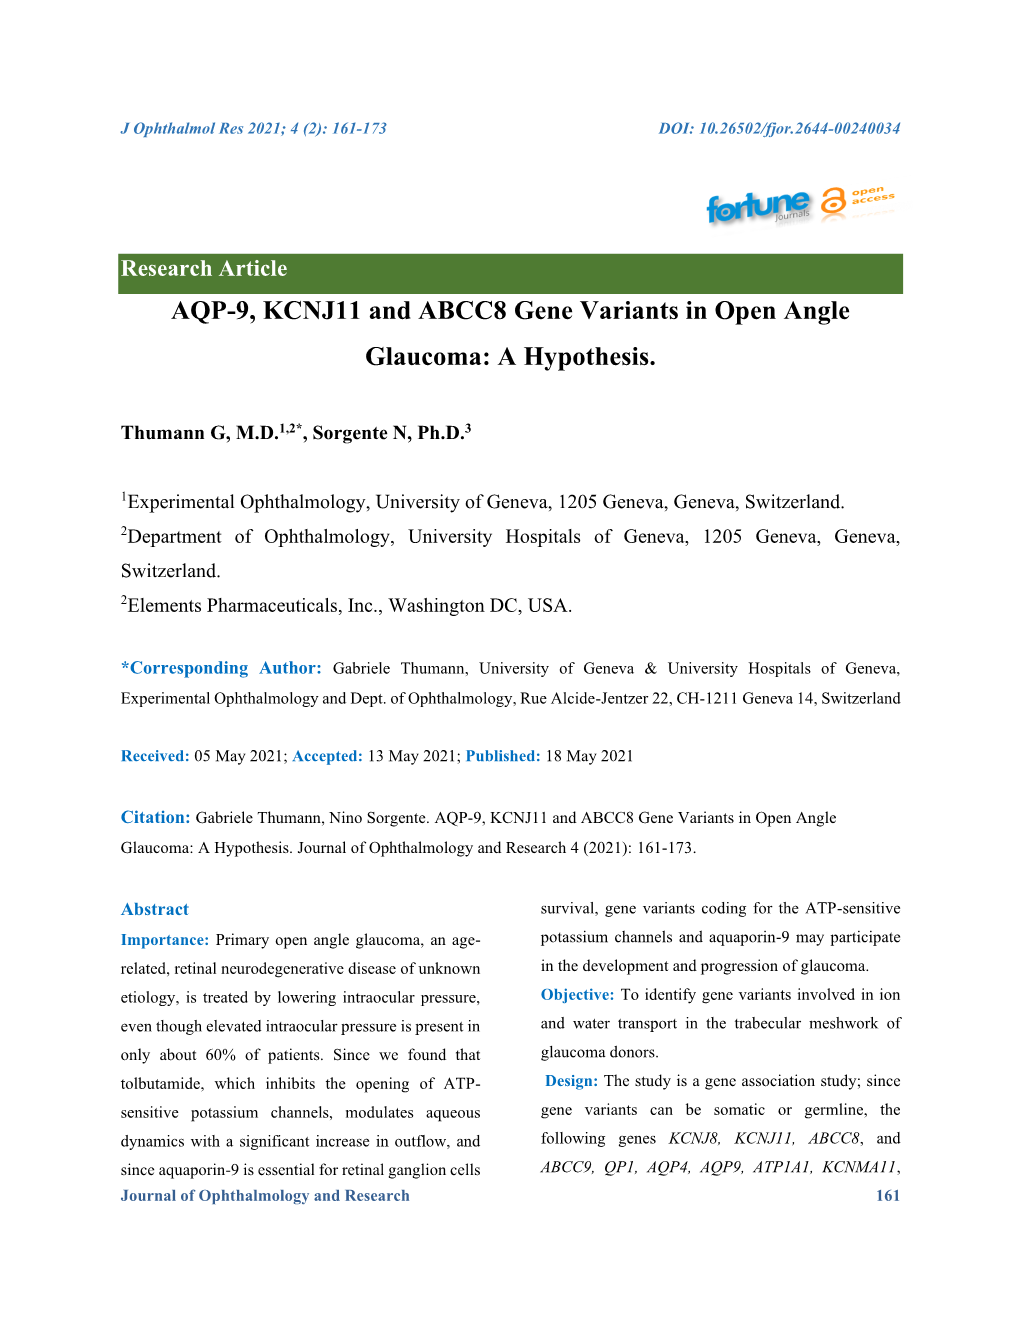 AQP-9, KCNJ11 and ABCC8 Gene Variants in Open Angle Glaucoma: a Hypothesis